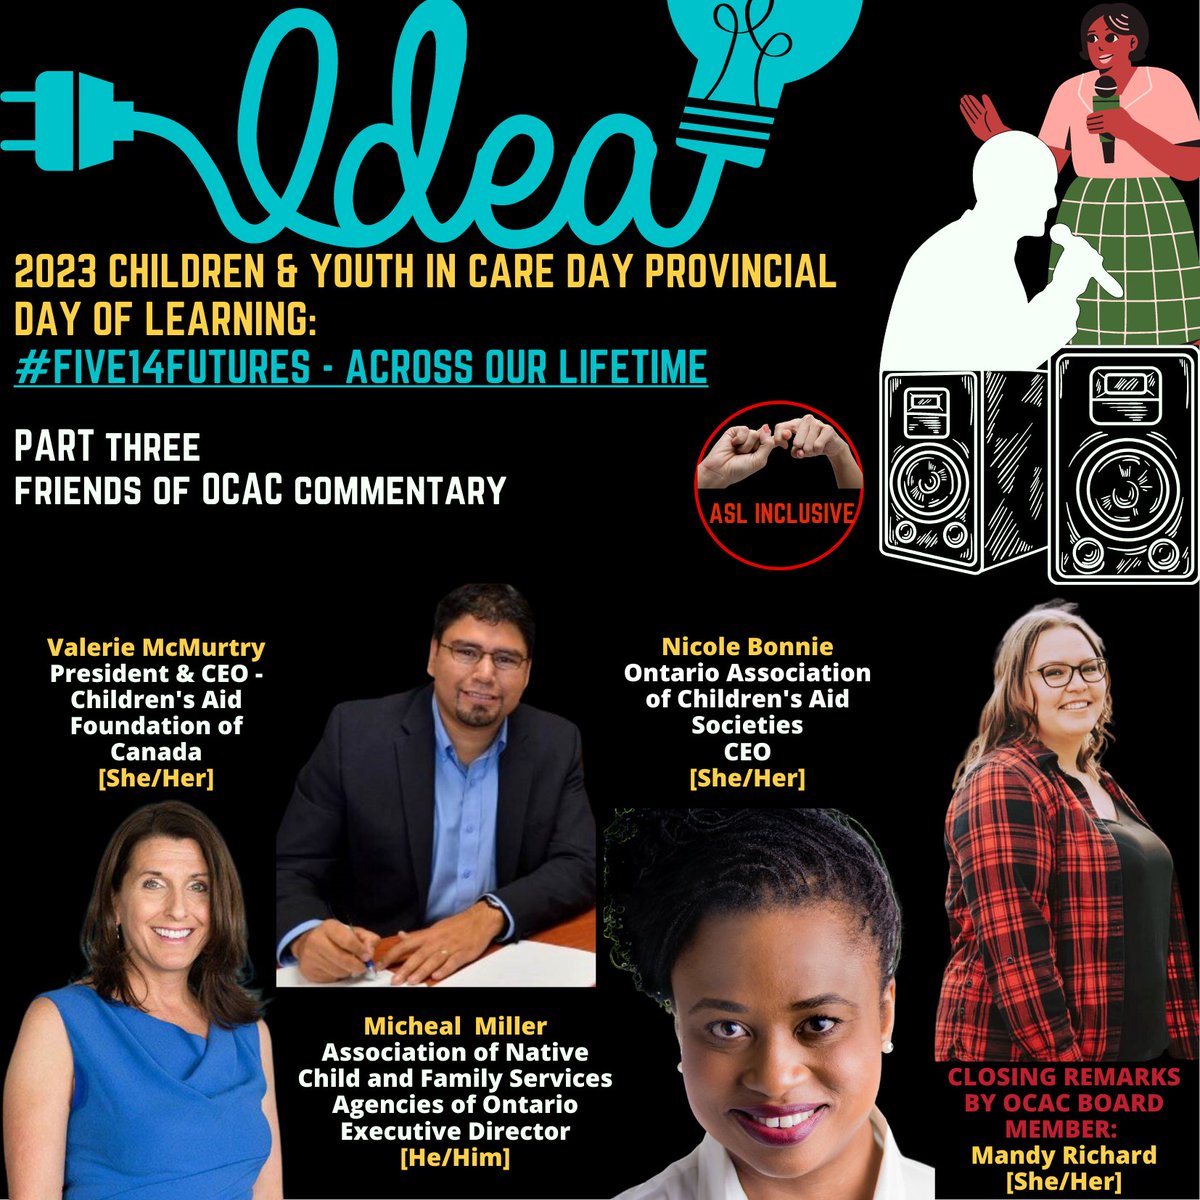 Join an amazing lineup of speakers from the Youth in/from Care communities, allied experts, and our CEO @NicoleBonnie5 as she speaks at the #Five14Futures- Provincial Day of Learning with the @ChildCoalition. The event is tomorrow at 11:45 AM! RSVP now: fb.me/e/2RaiOC2Ik